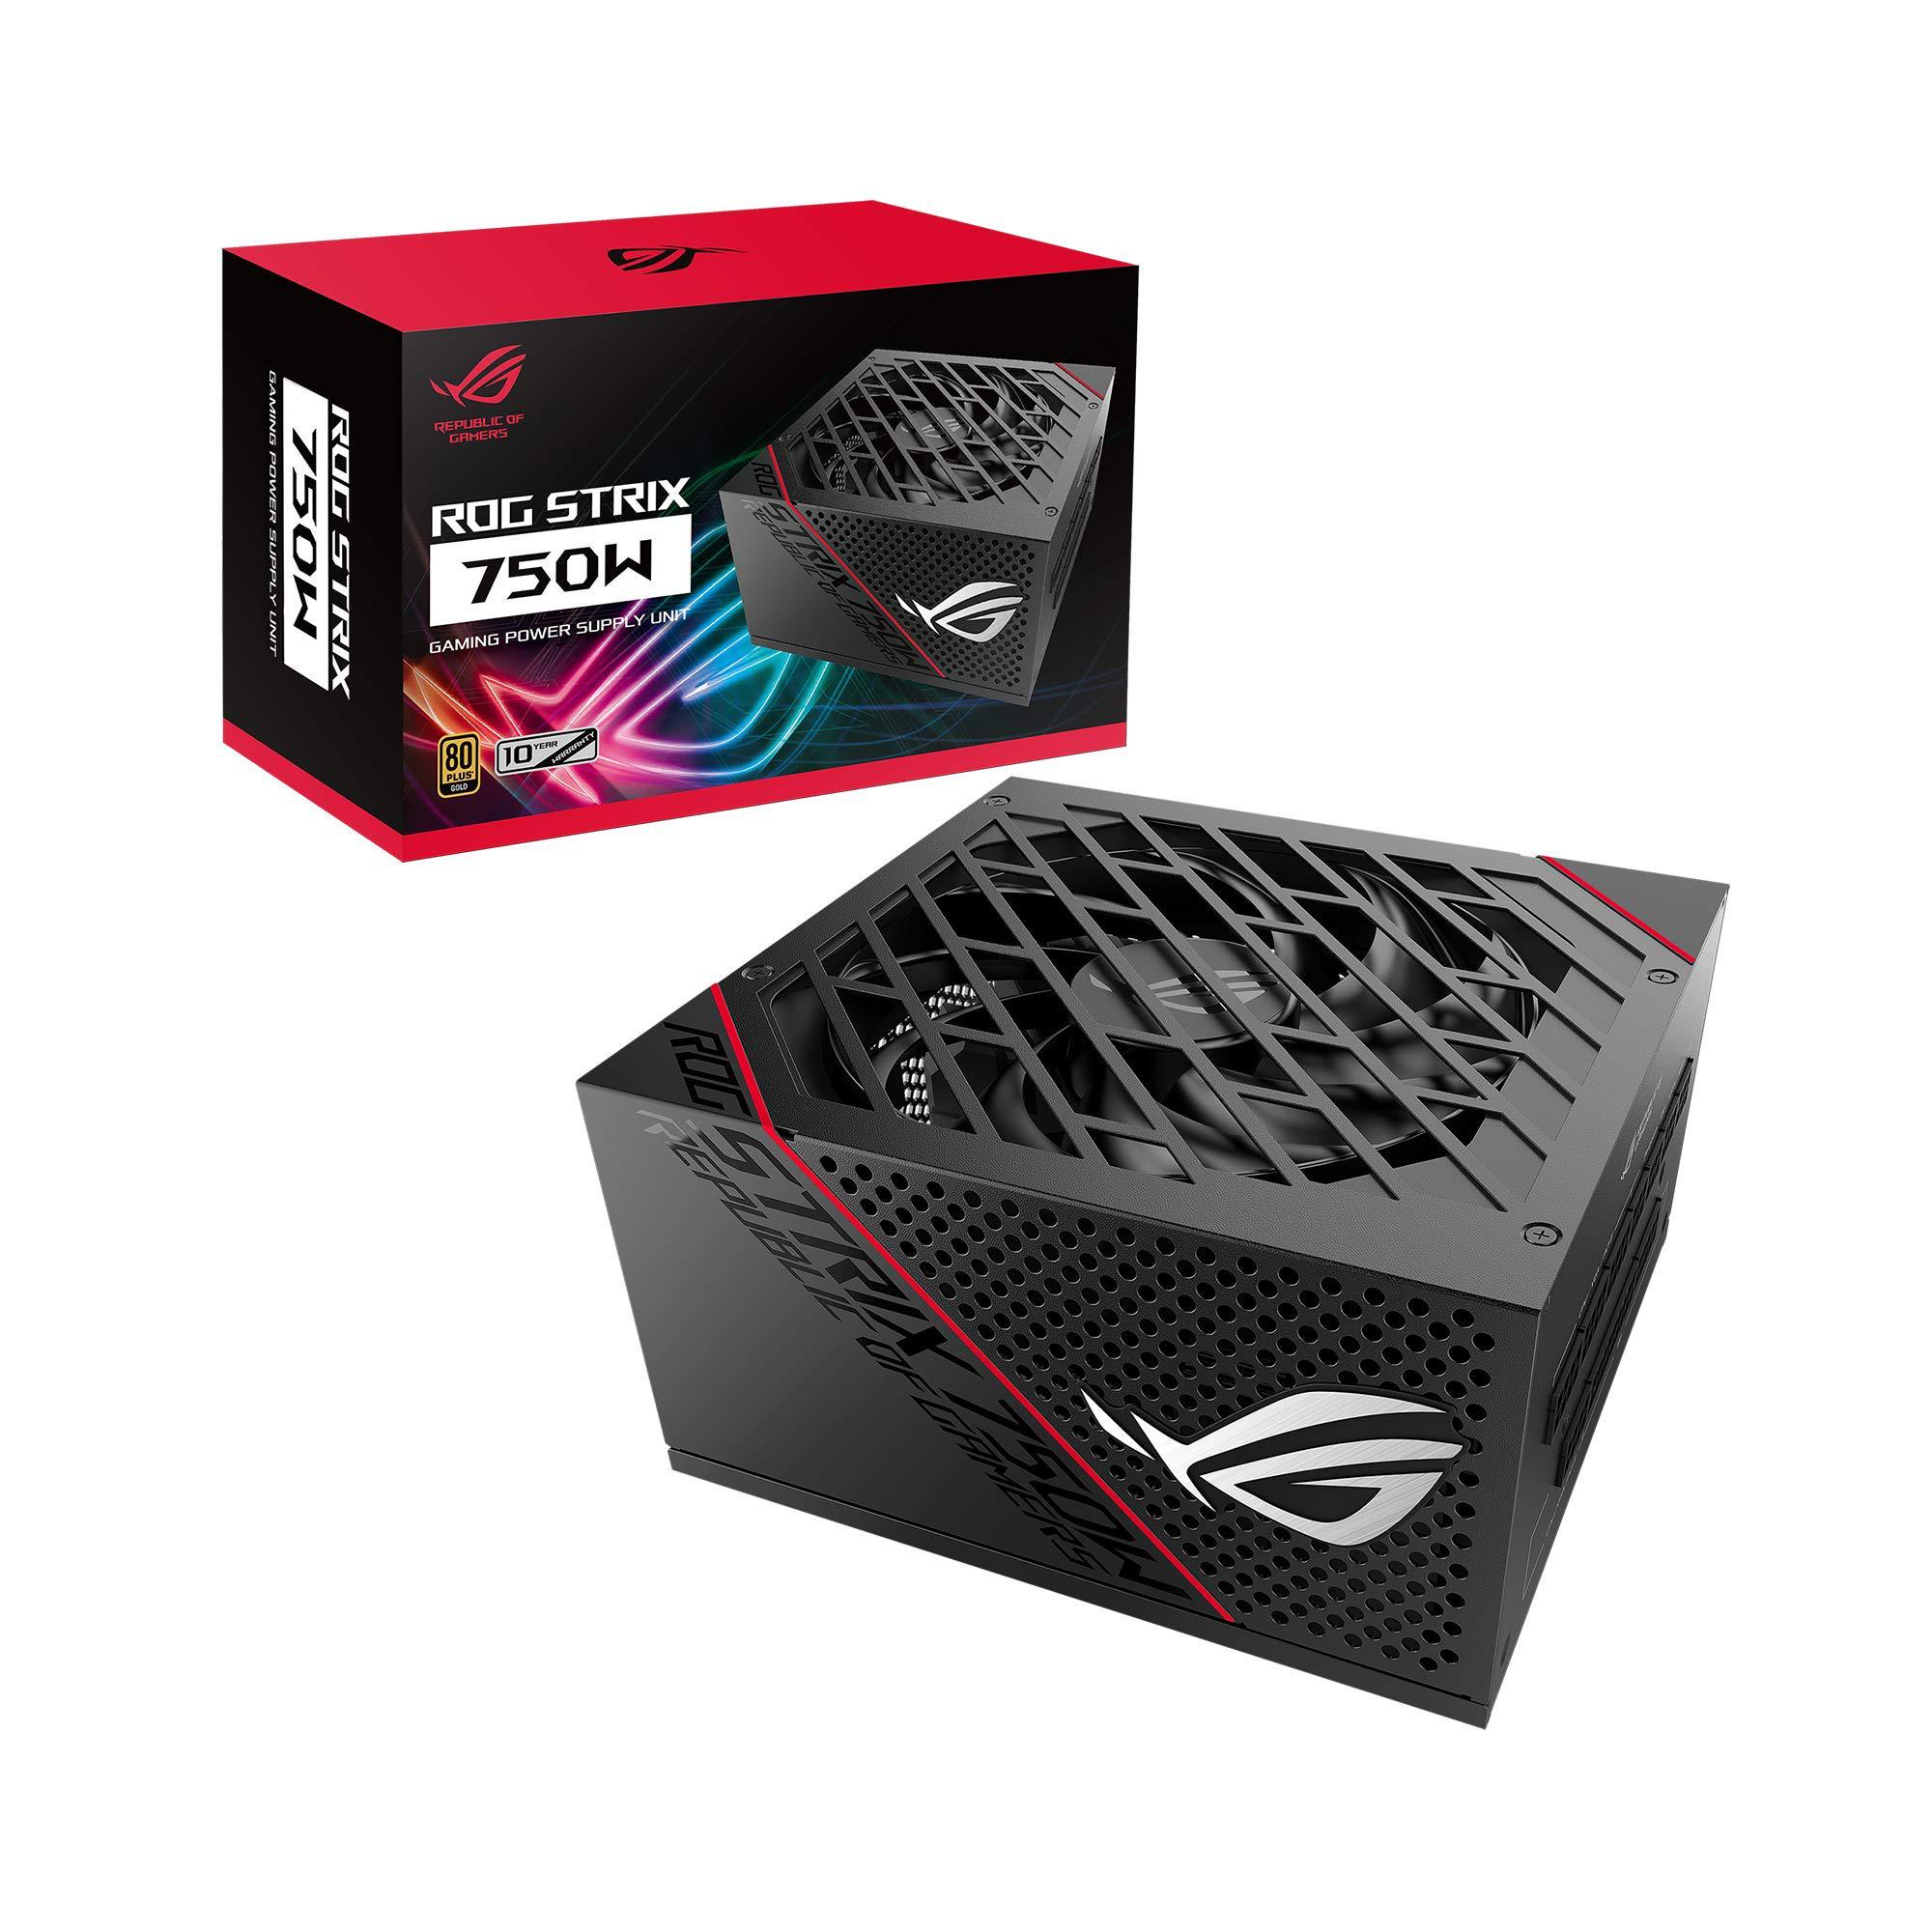 ASUS ROg Strix 750 Fully Modular 80 Plus gold 750W ATX Power Supply with 0dB Axial Tech Fan and 10 Year Warranty